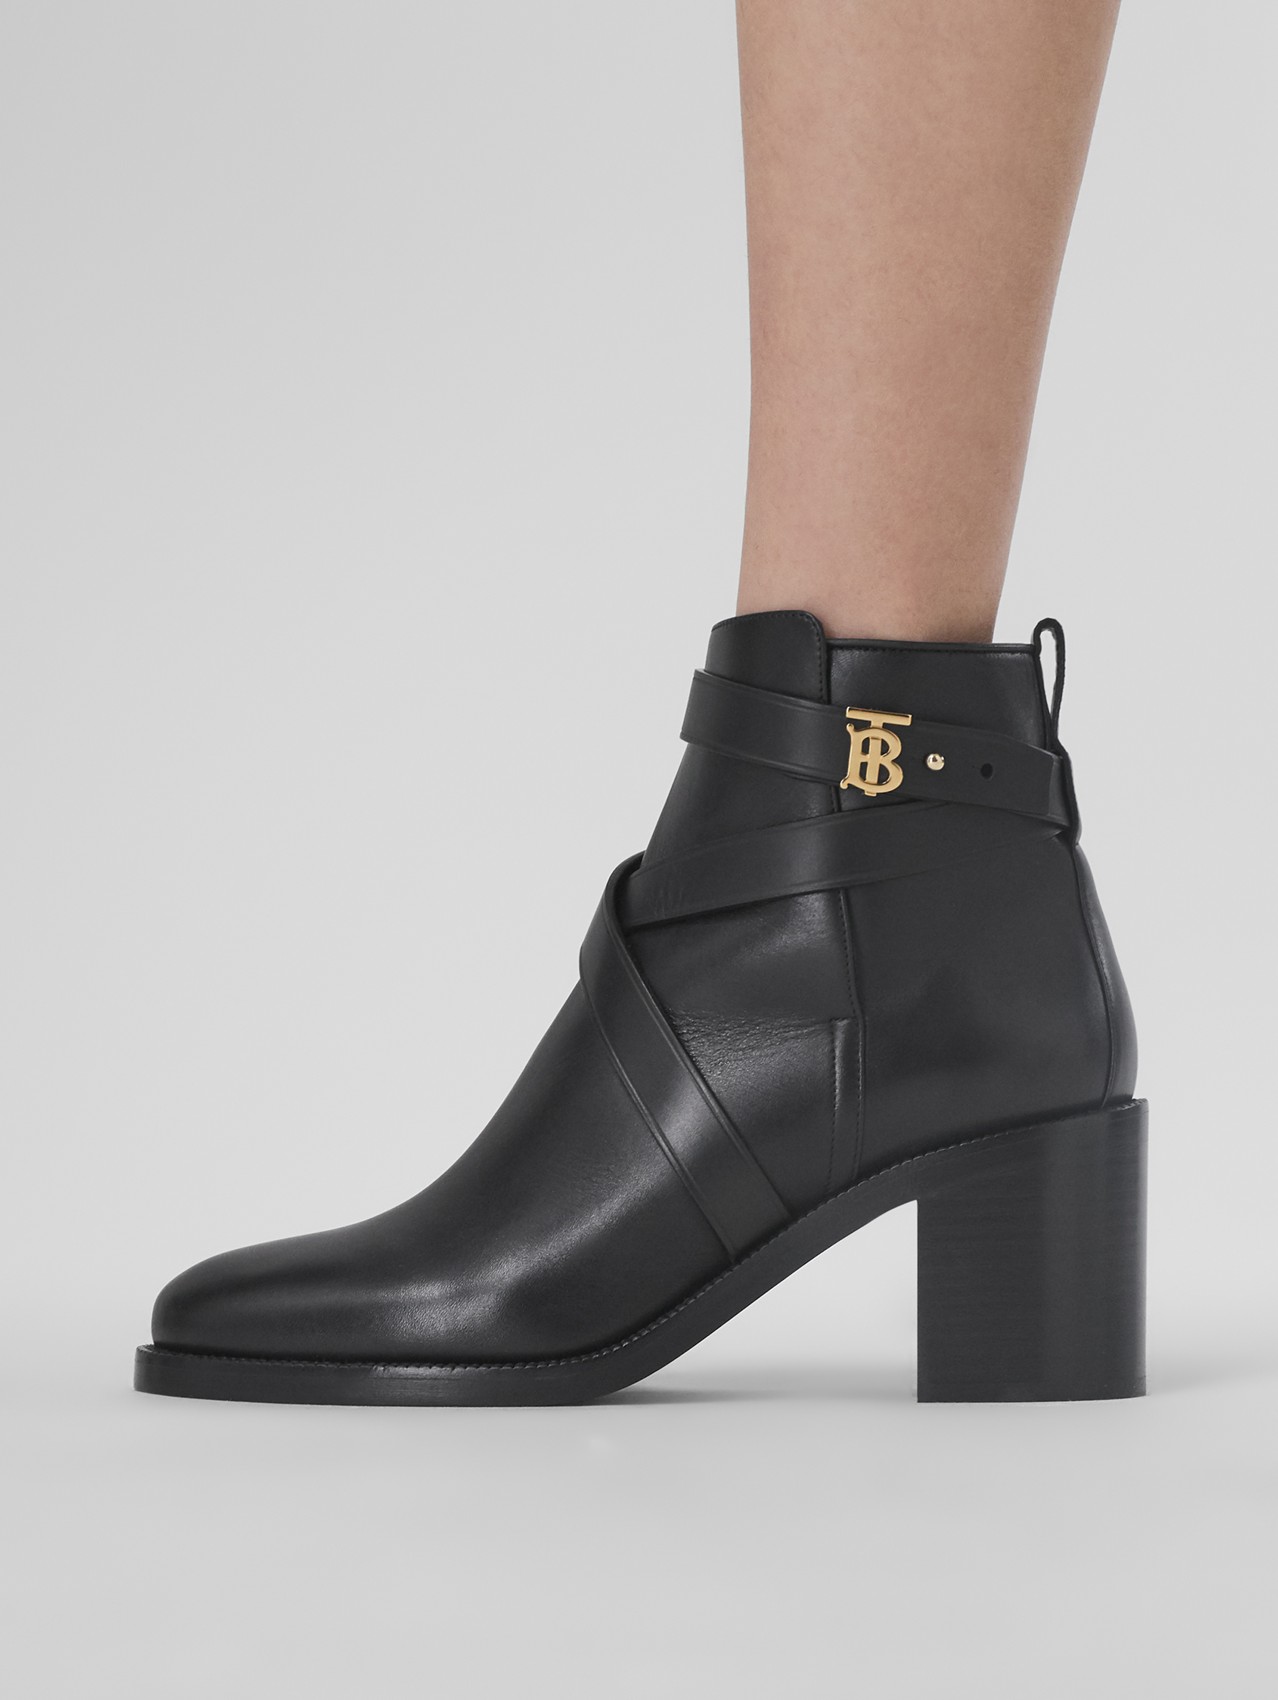 Monogram Motif Leather Ankle Boots in Black